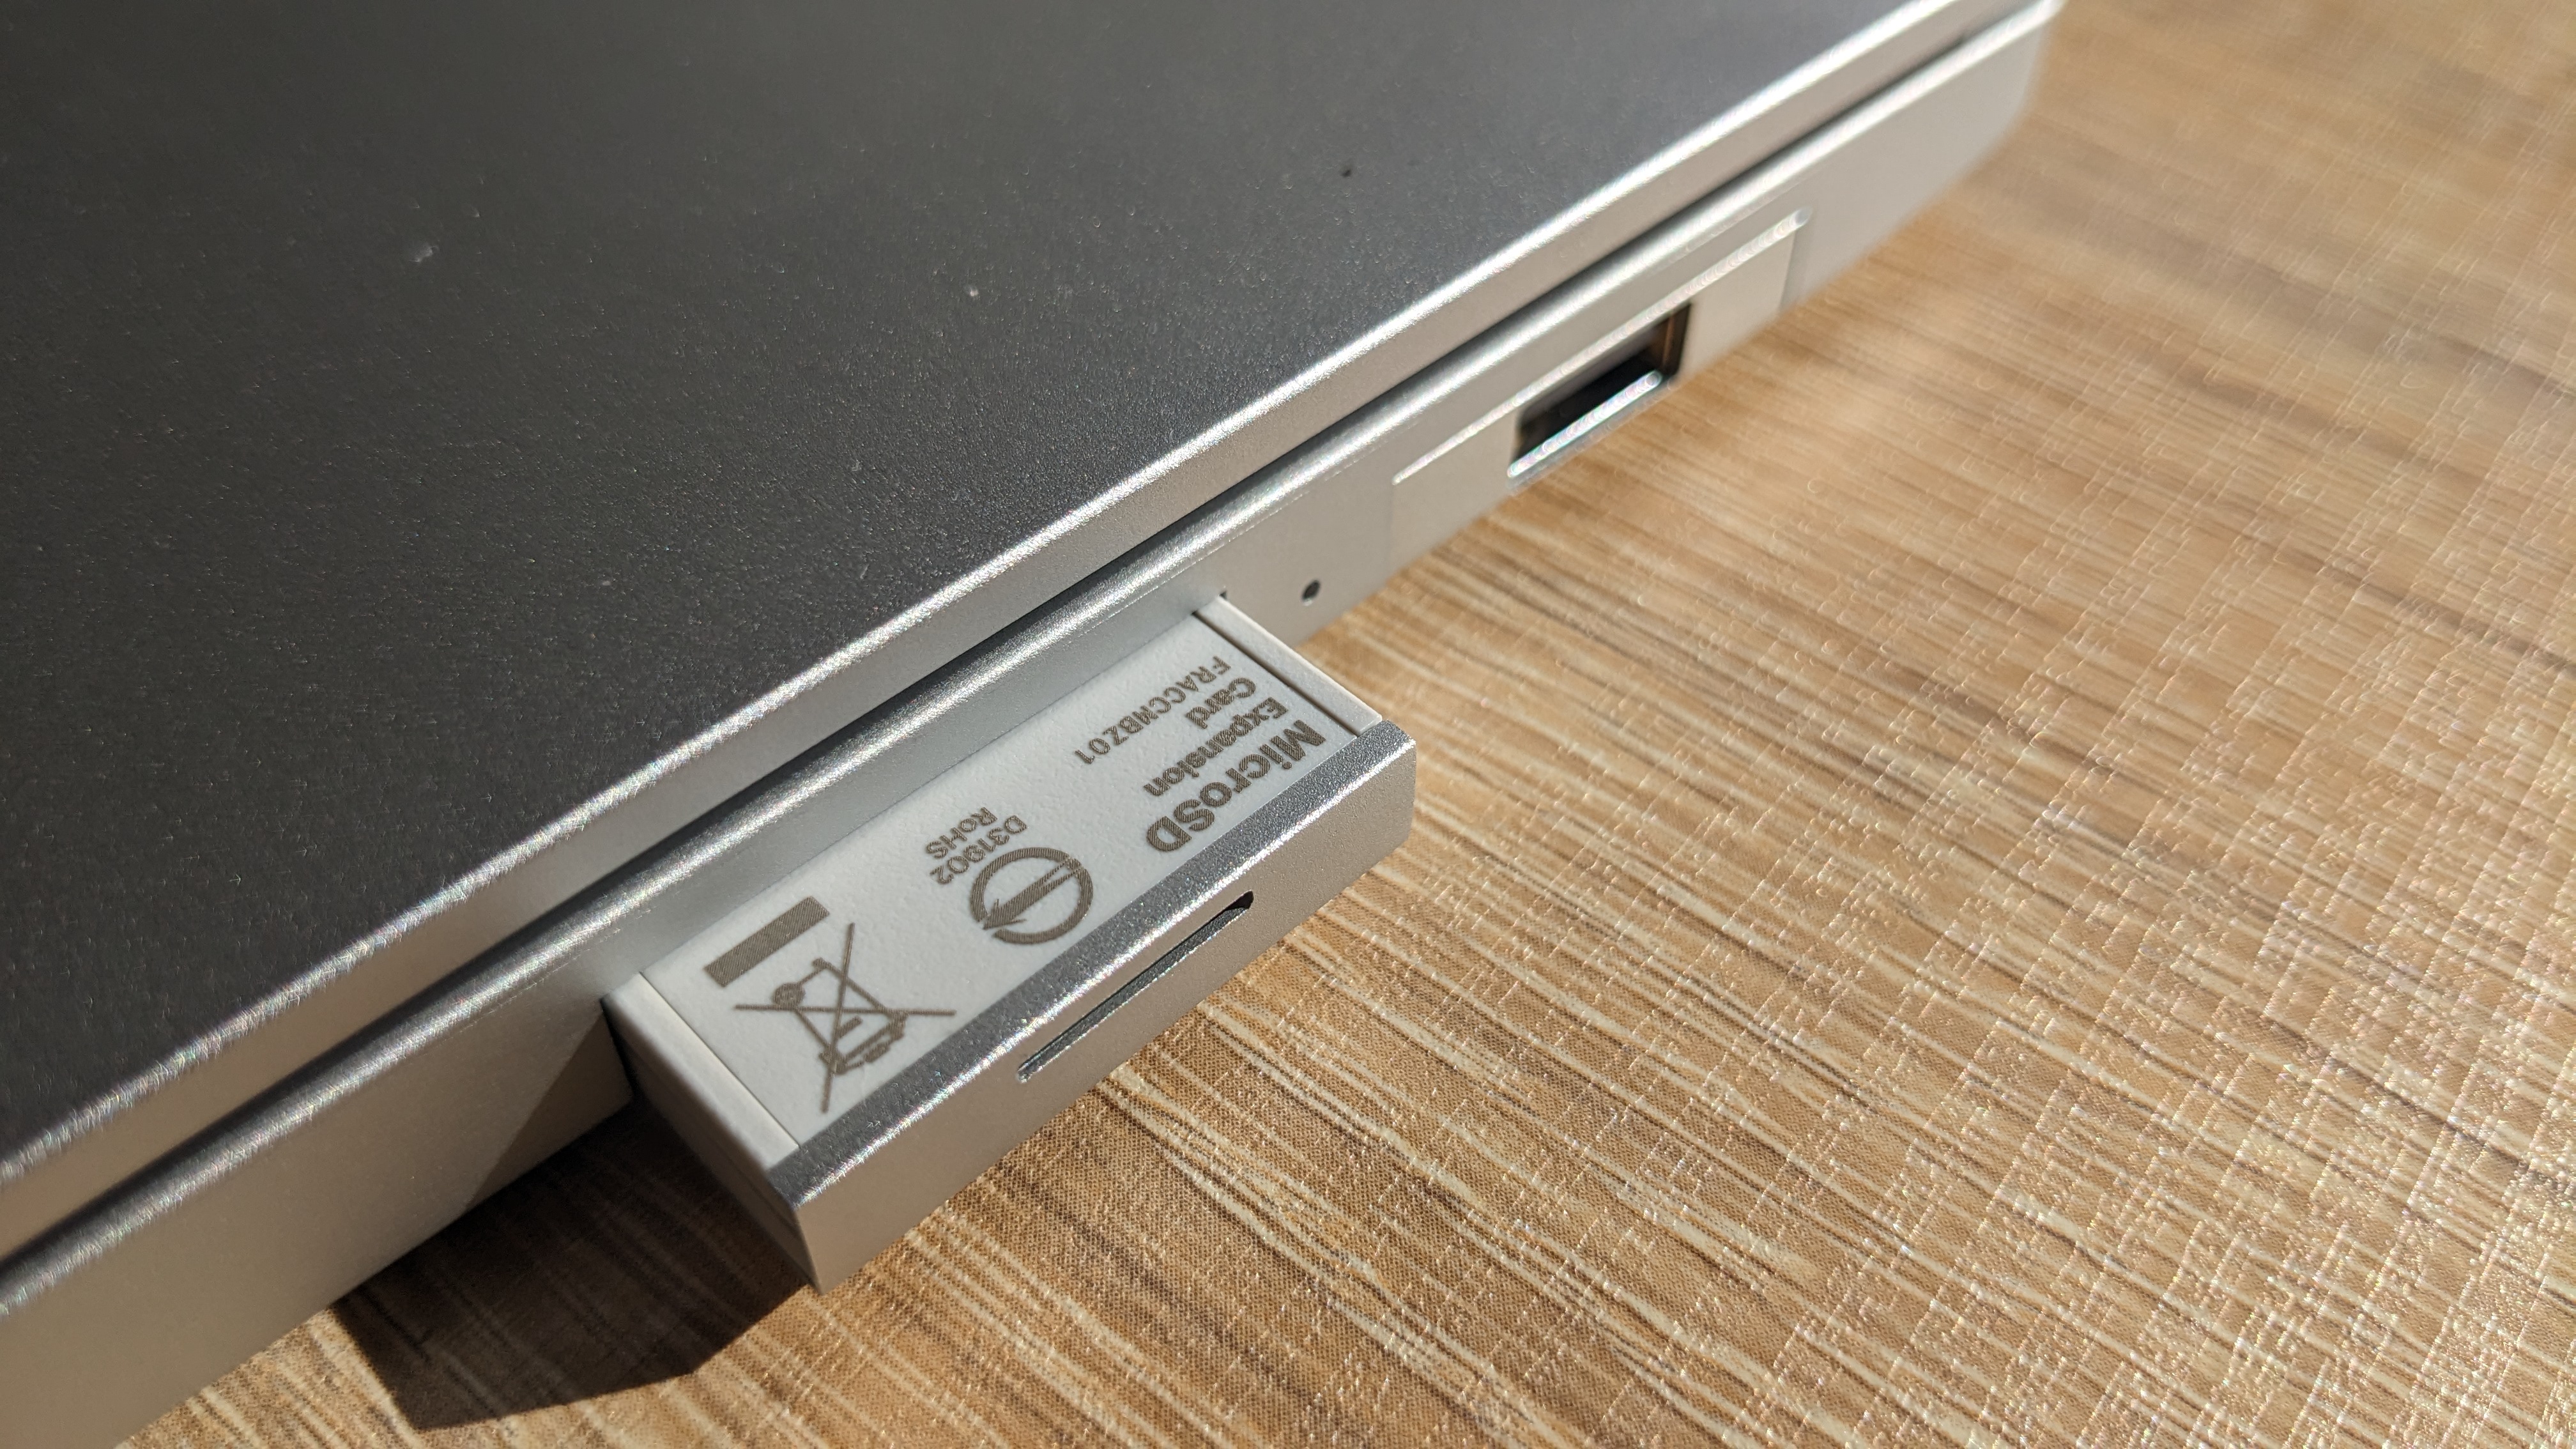 The Framework Laptop Chromebook Edition photographed on a wooden desk.